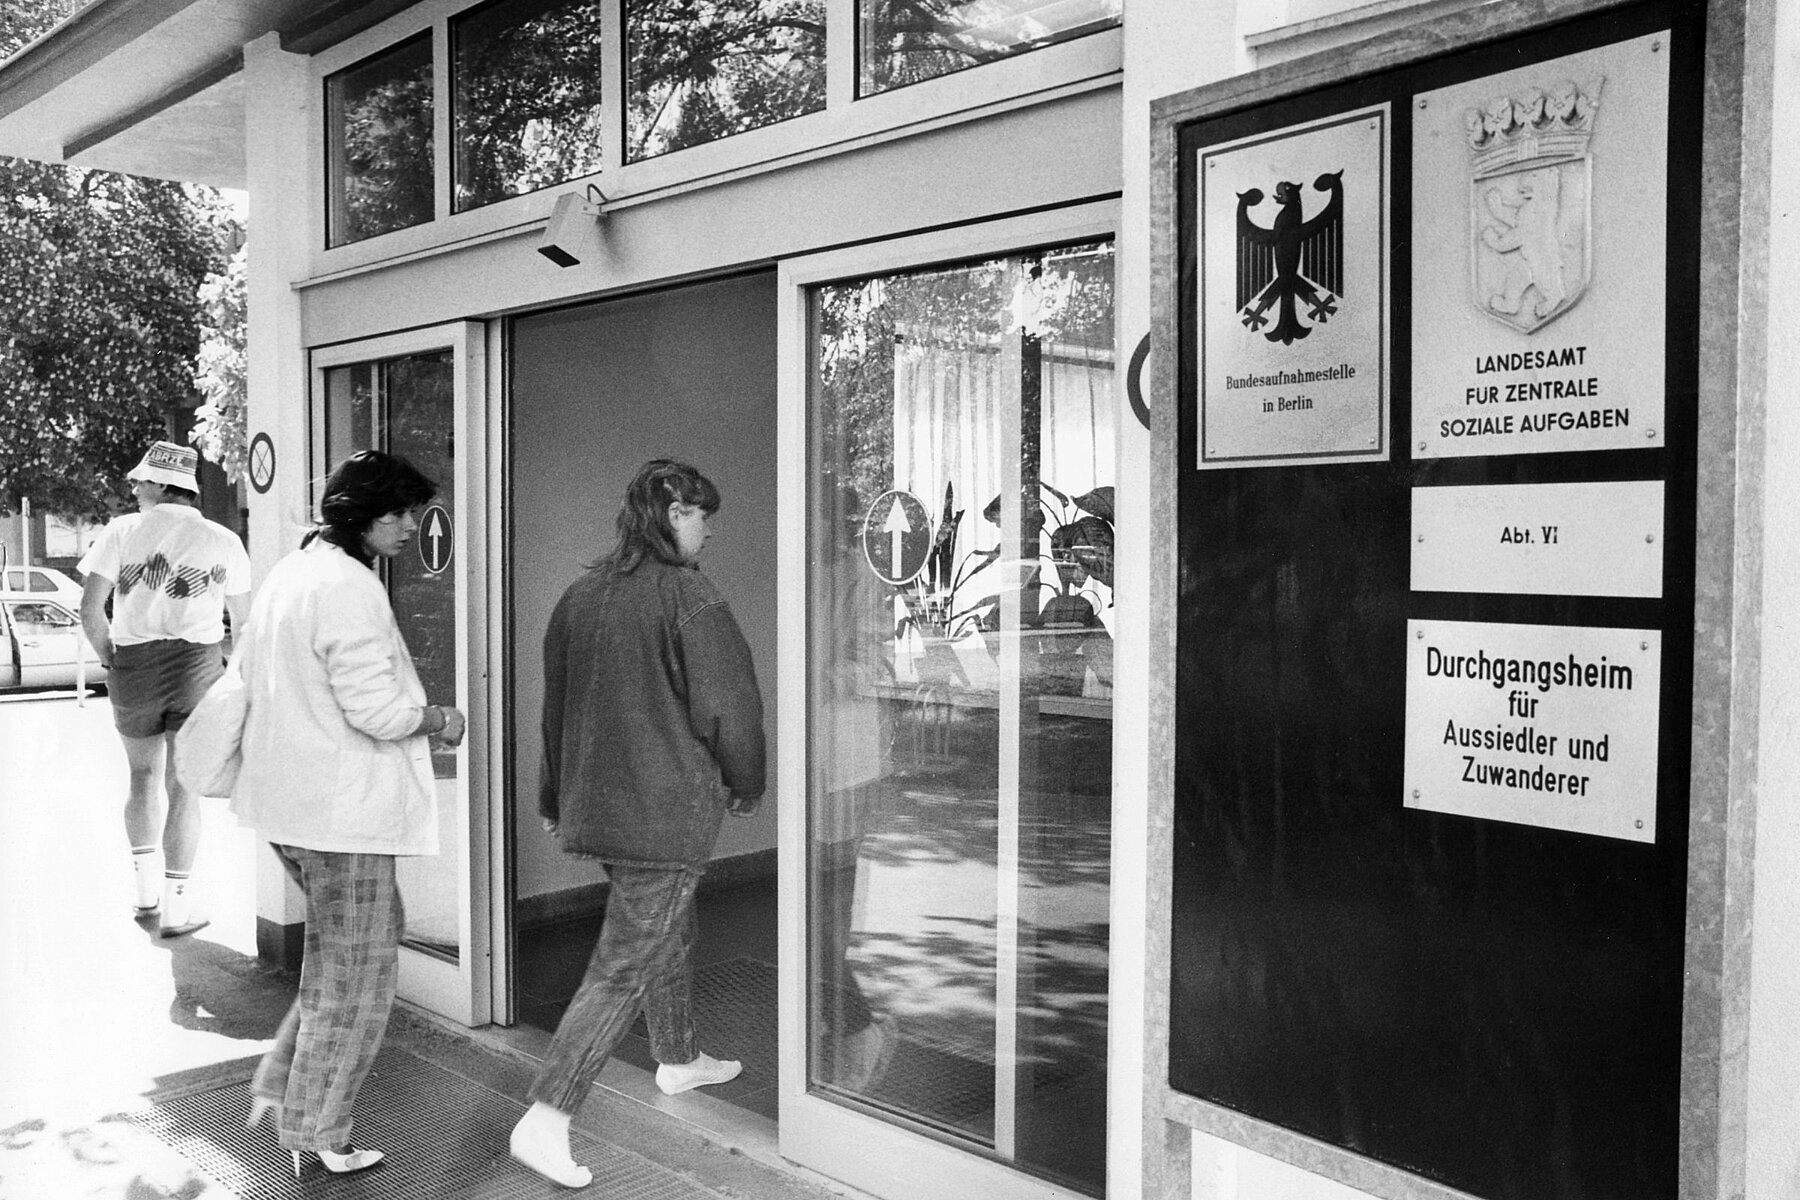 Two people walk through the entrance door of the Marienfelde Refugee Centre.